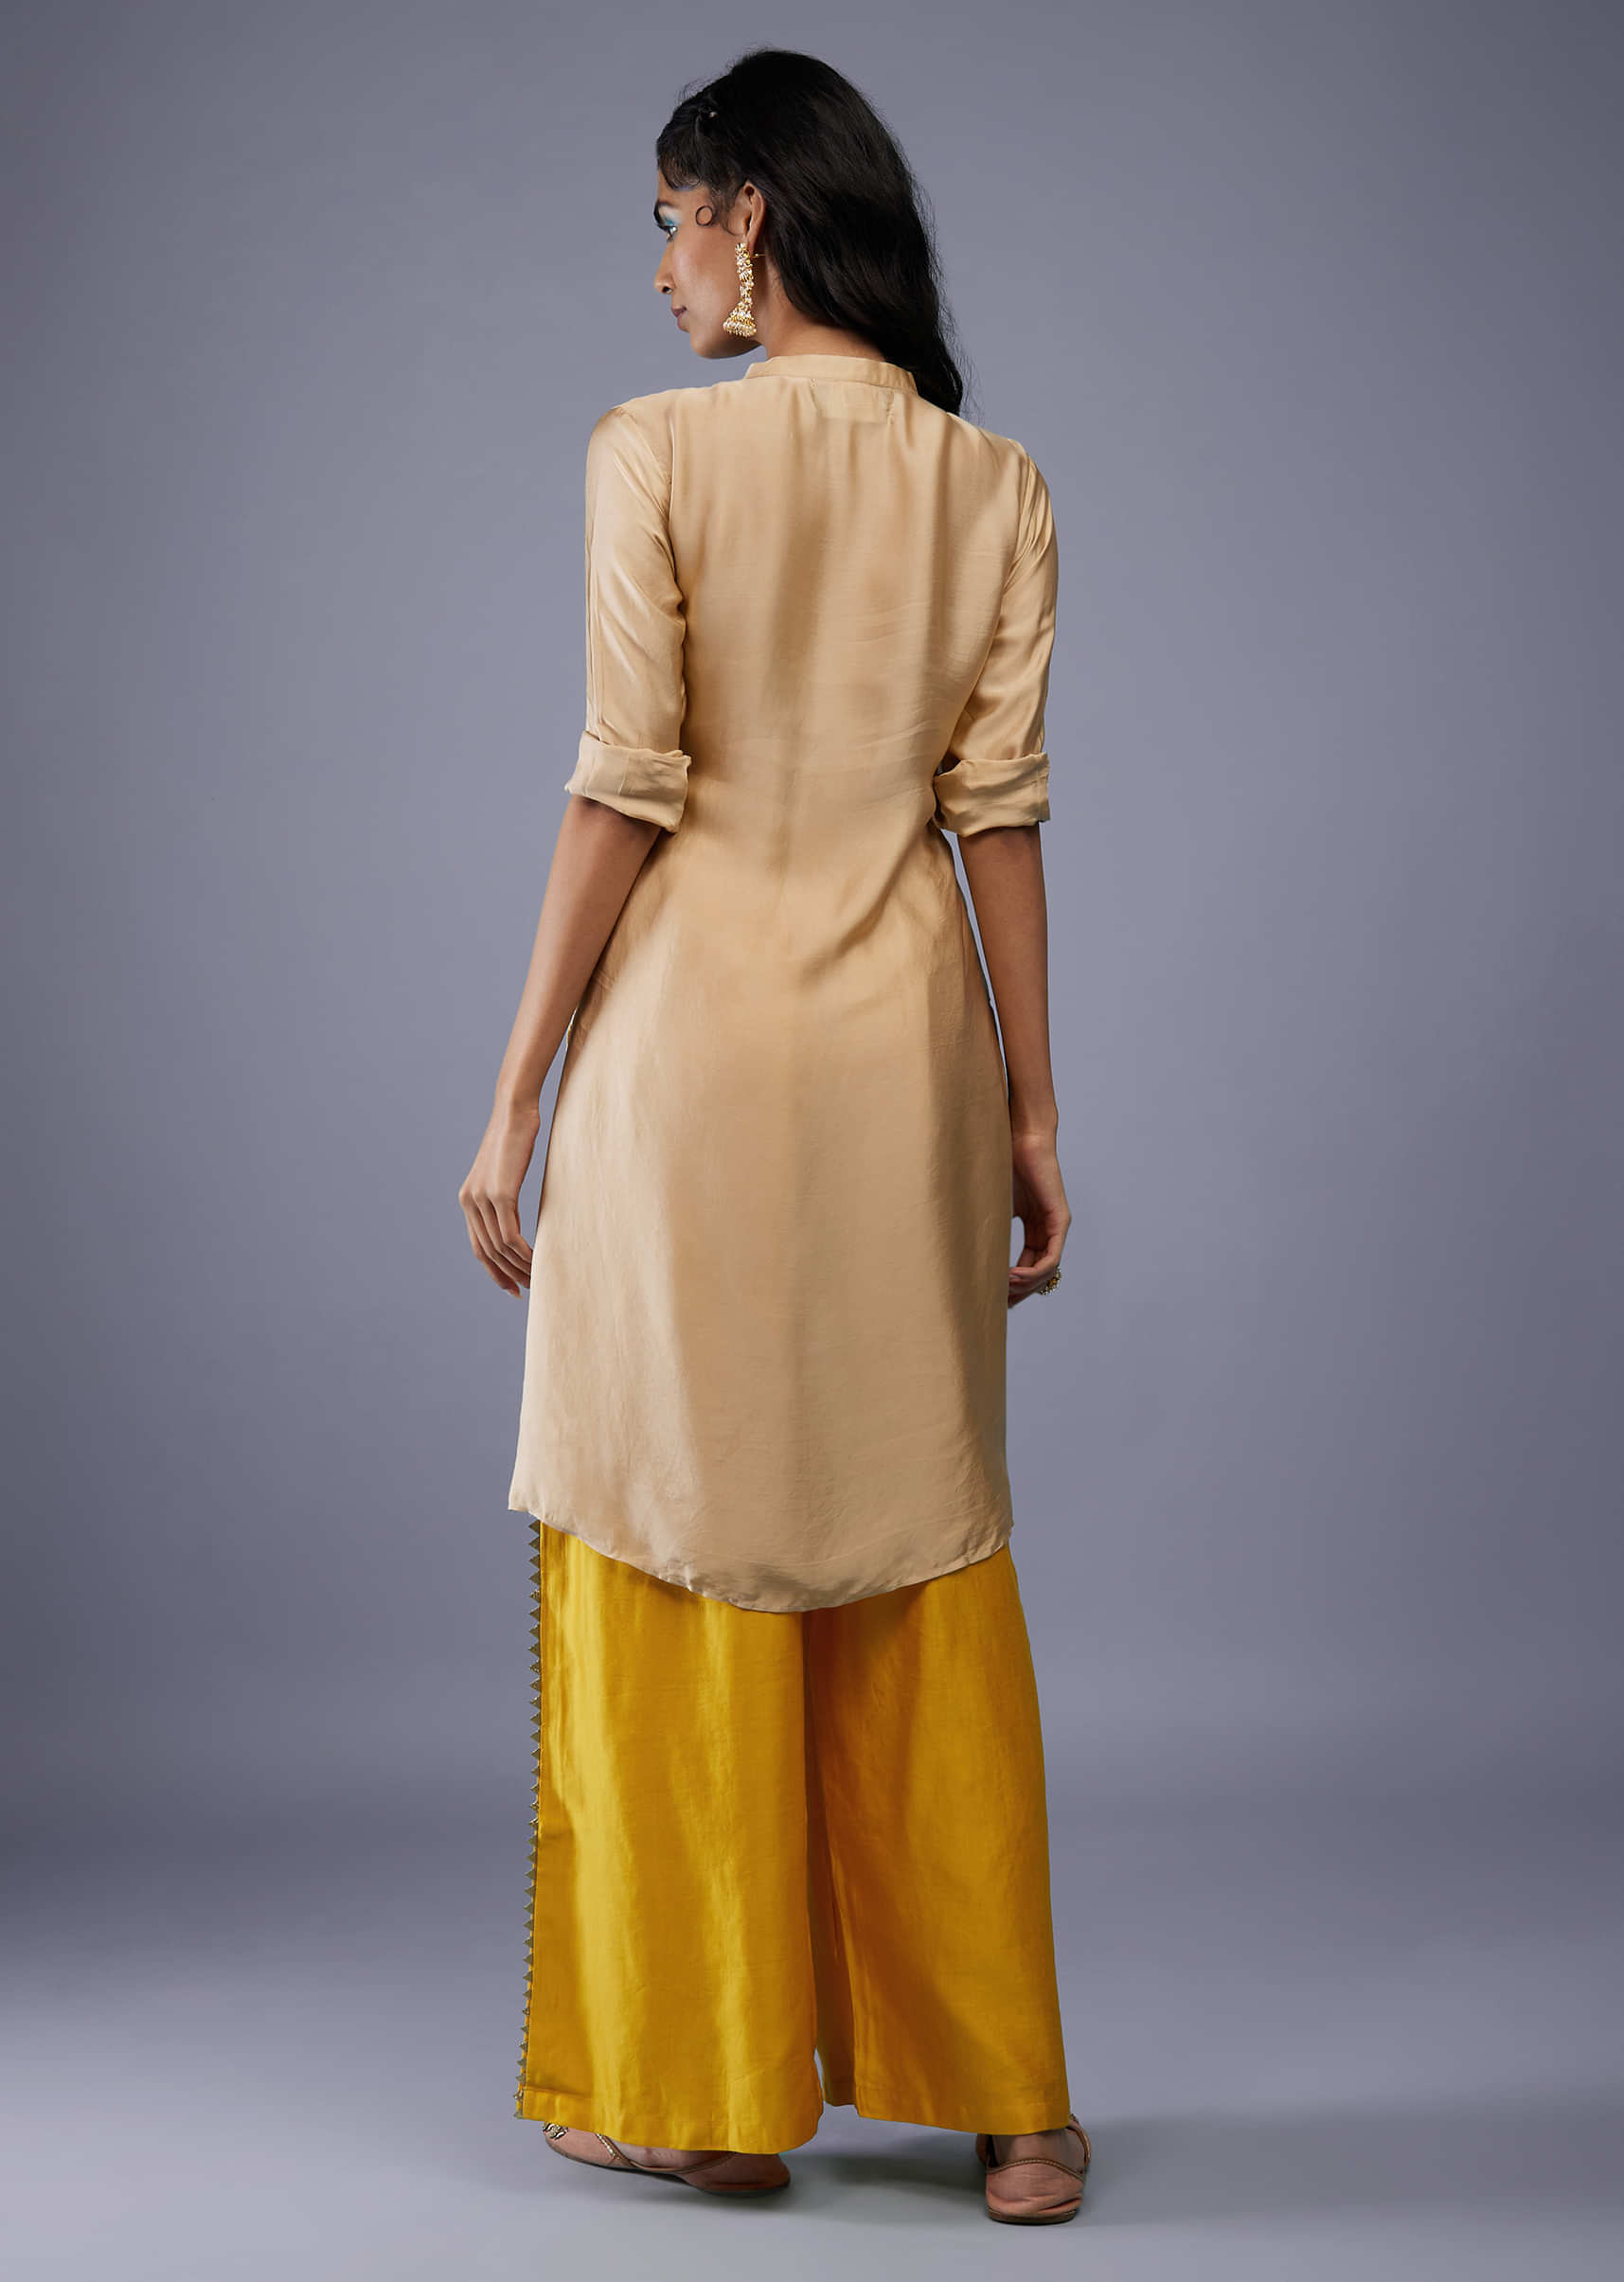 Ombre Shaded Champagne Brown And Cyber Yellow Gajji Silk Bandhani Top With Cotton Silk Palazzo